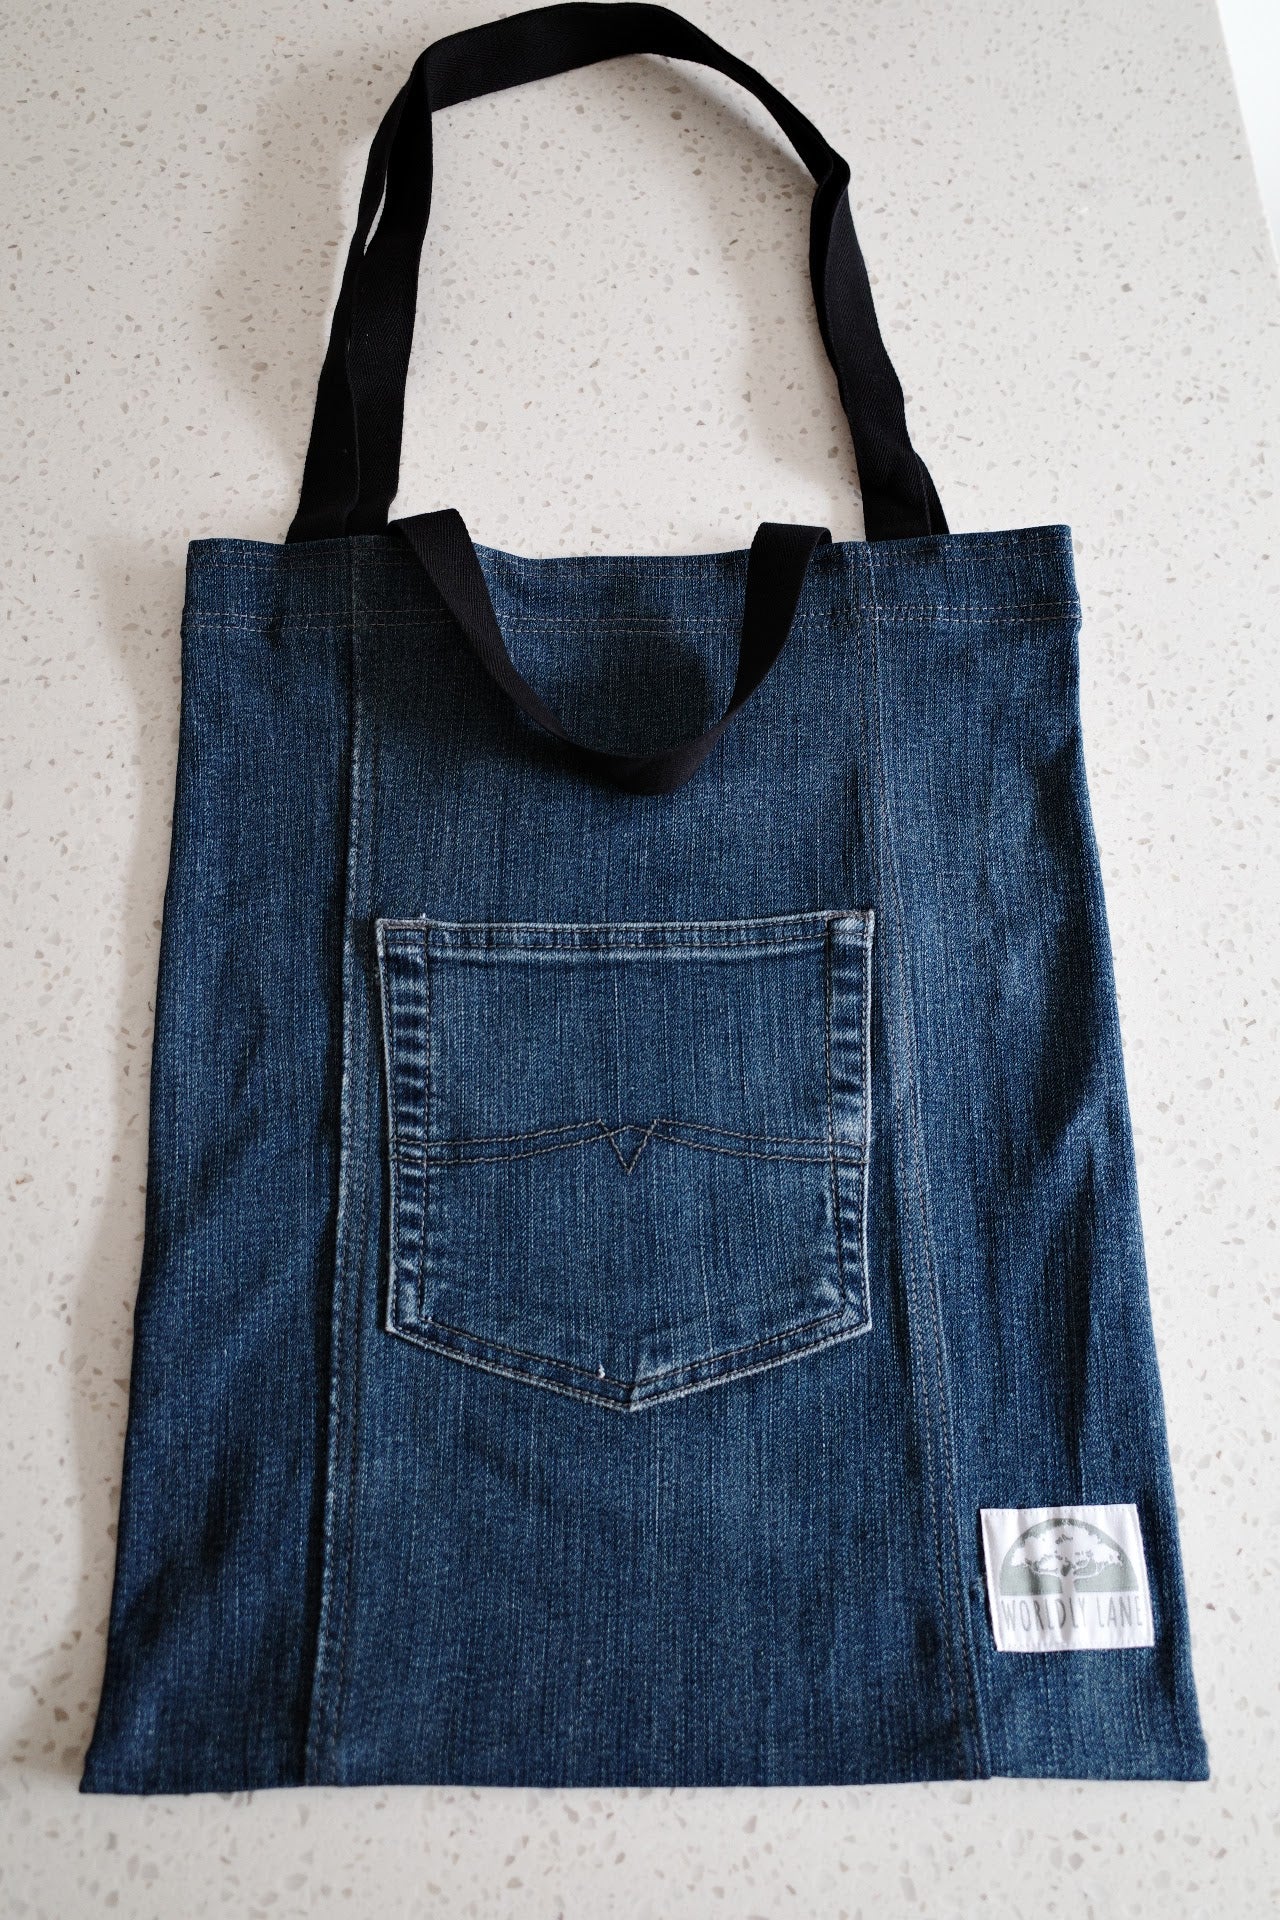 Upcycled Denim Tote Bags